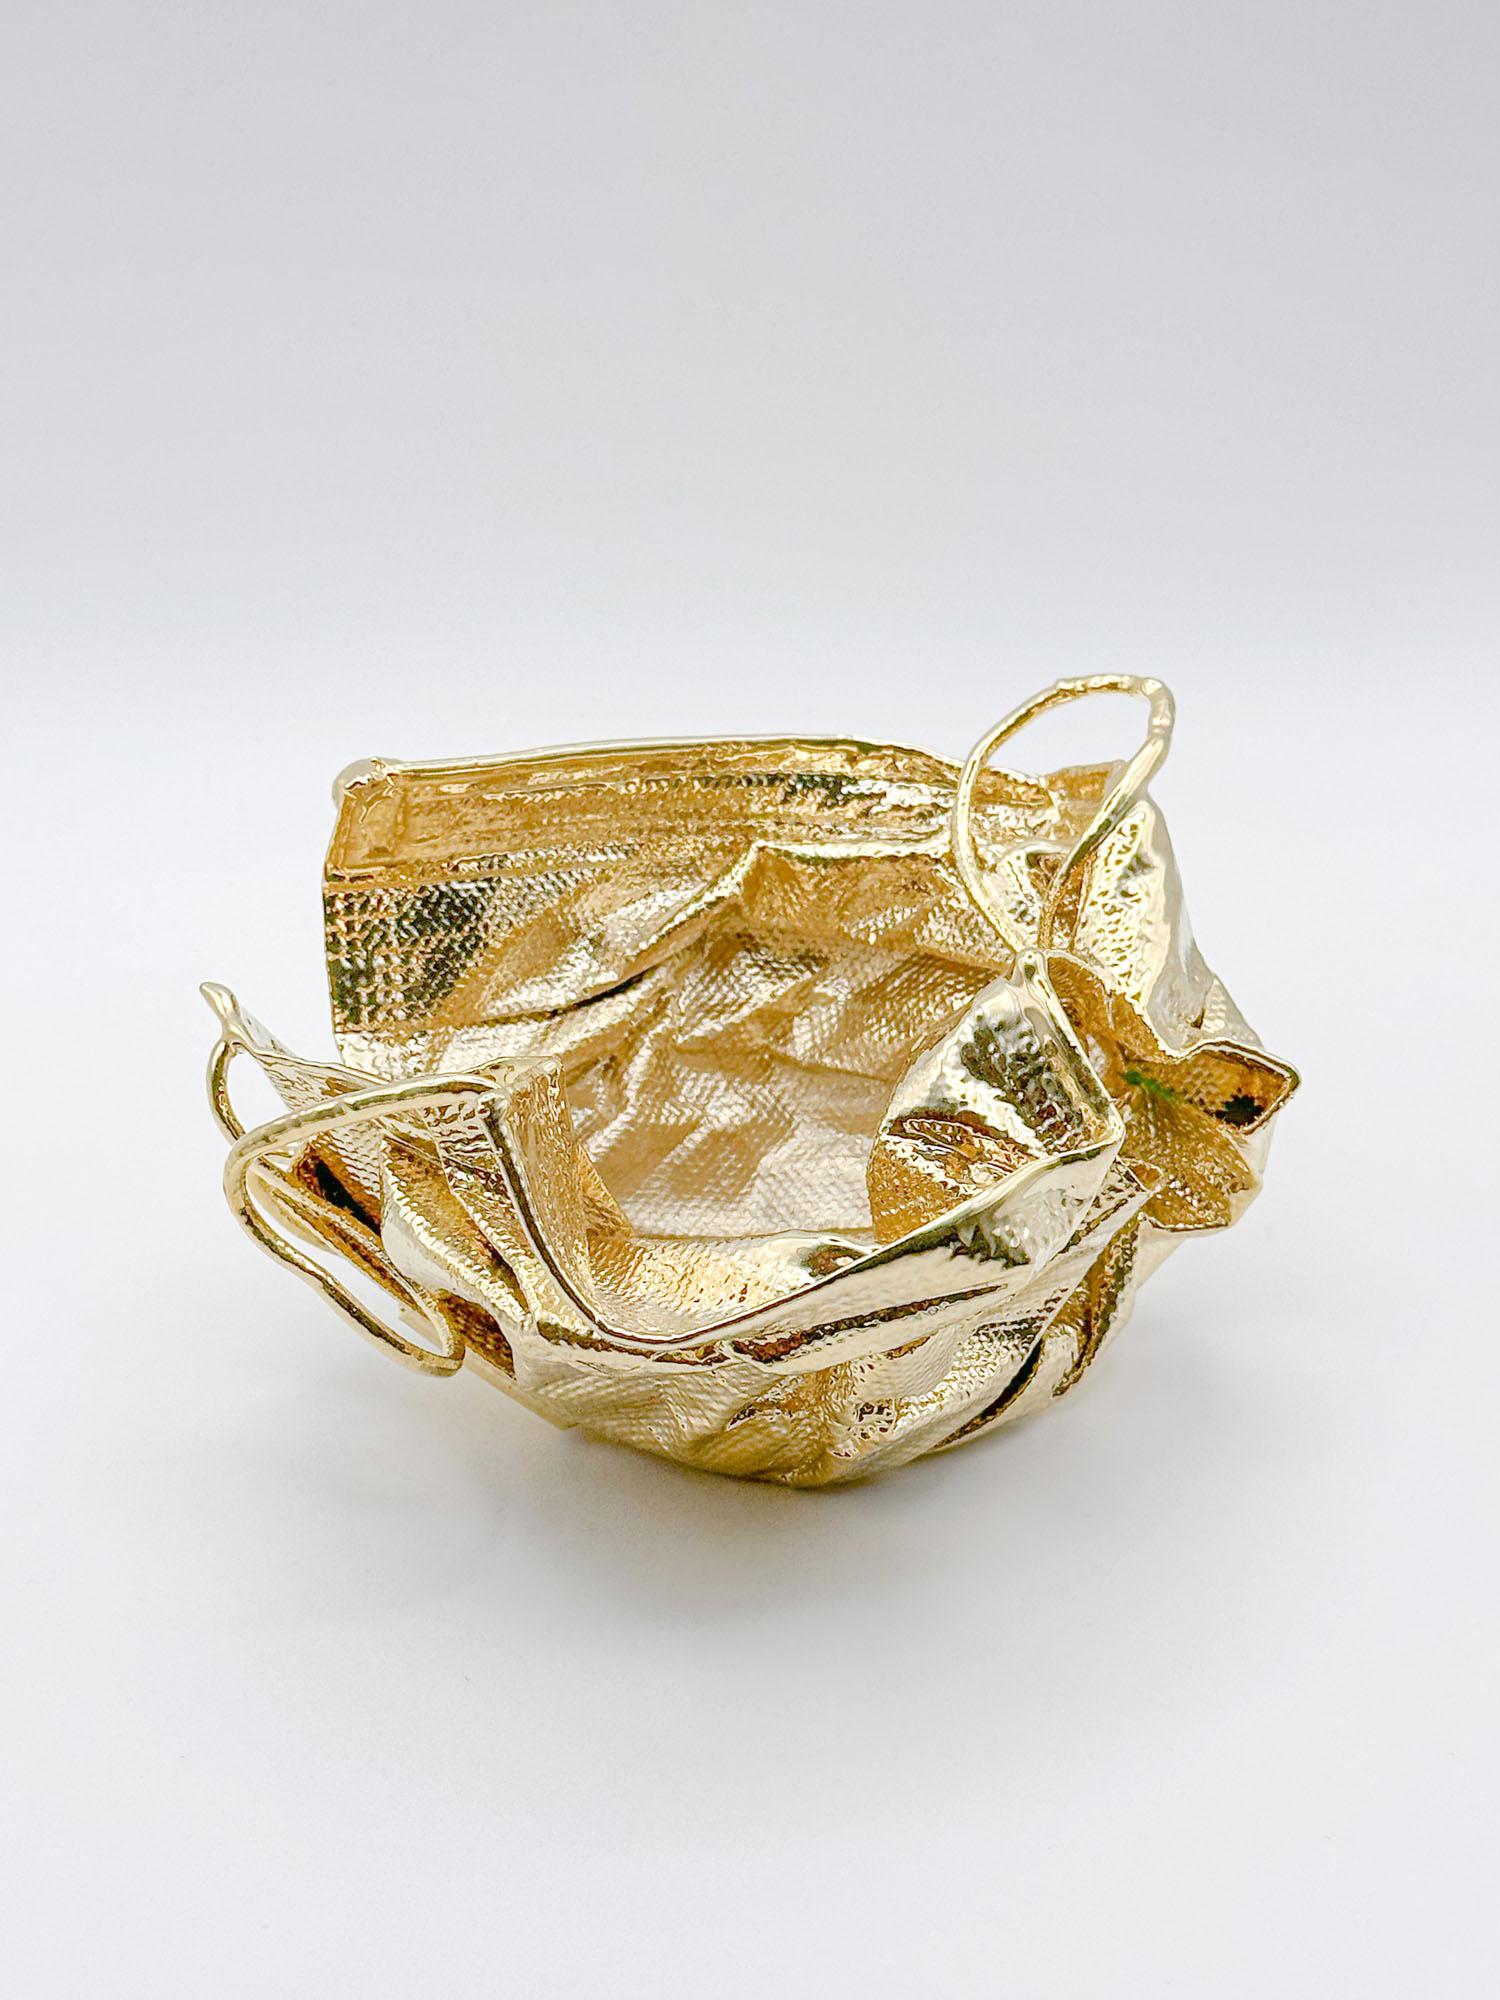 Italian Remask Act 009 Gold Art Object Made from Surgical Mask by Enrico Girotti For Sale